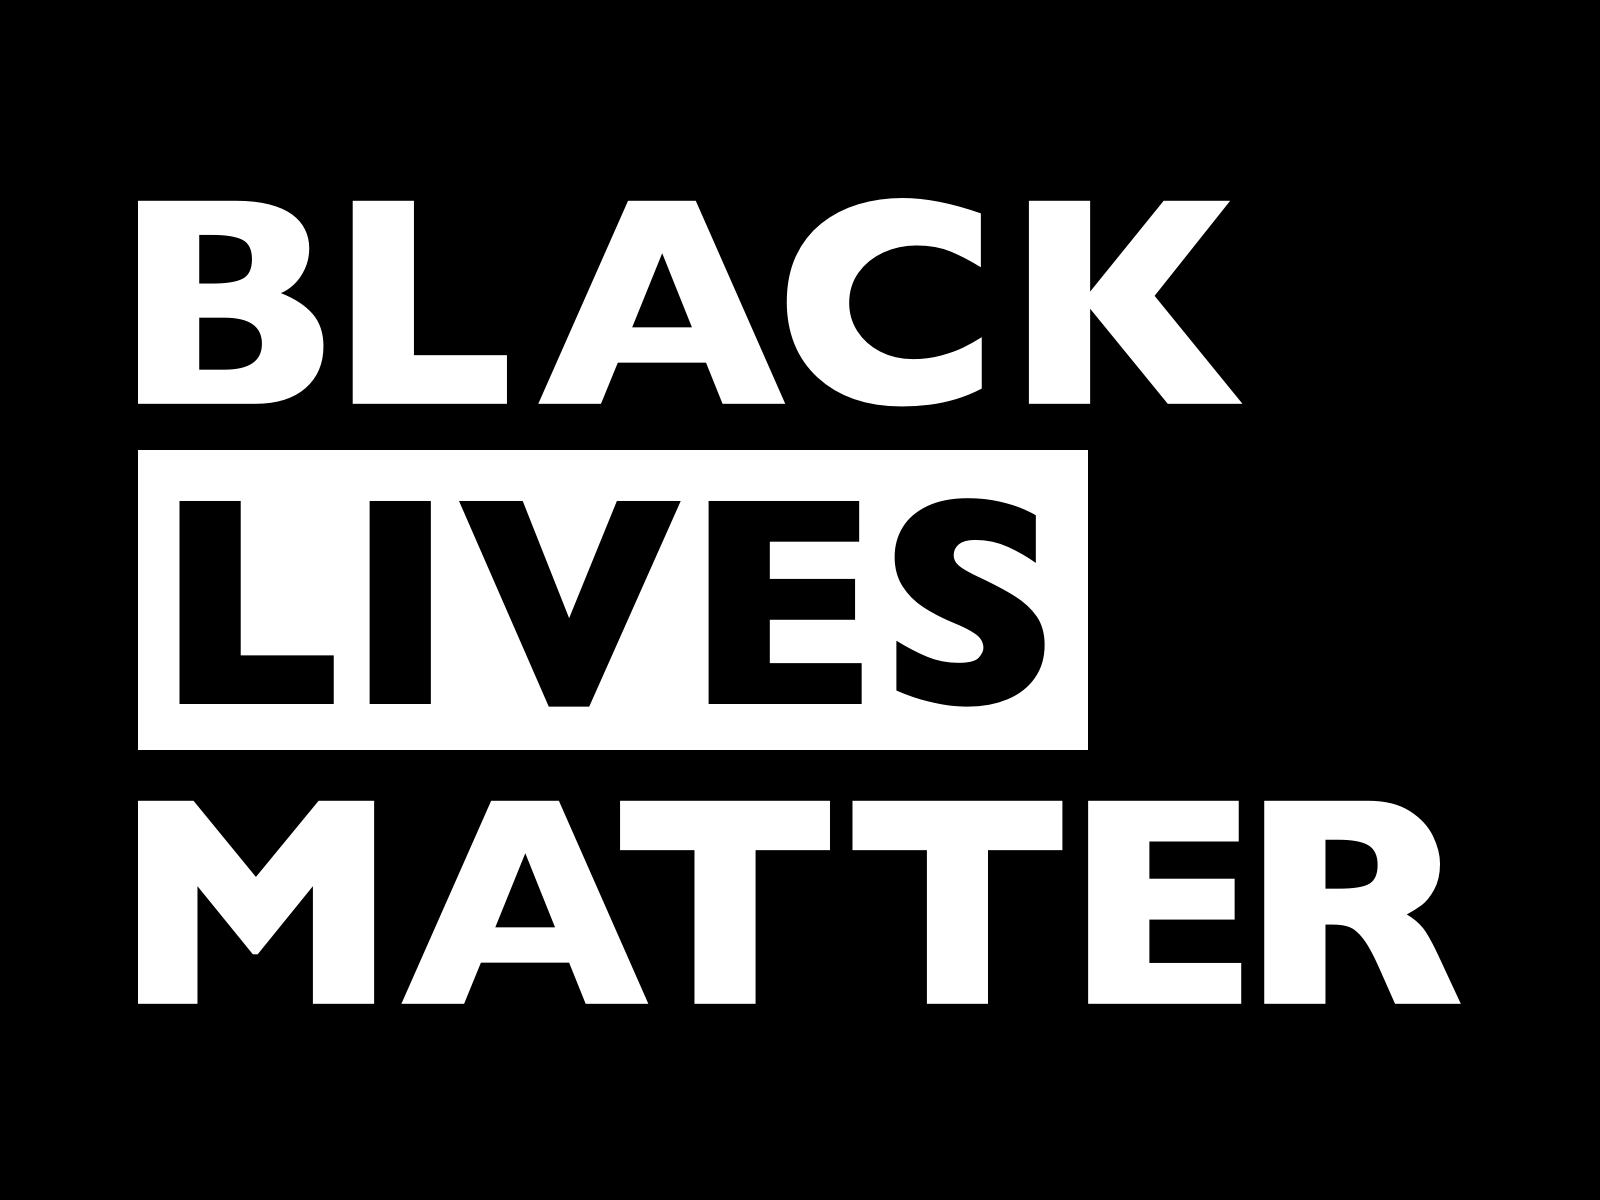 An image showing the words Black Lives Matter